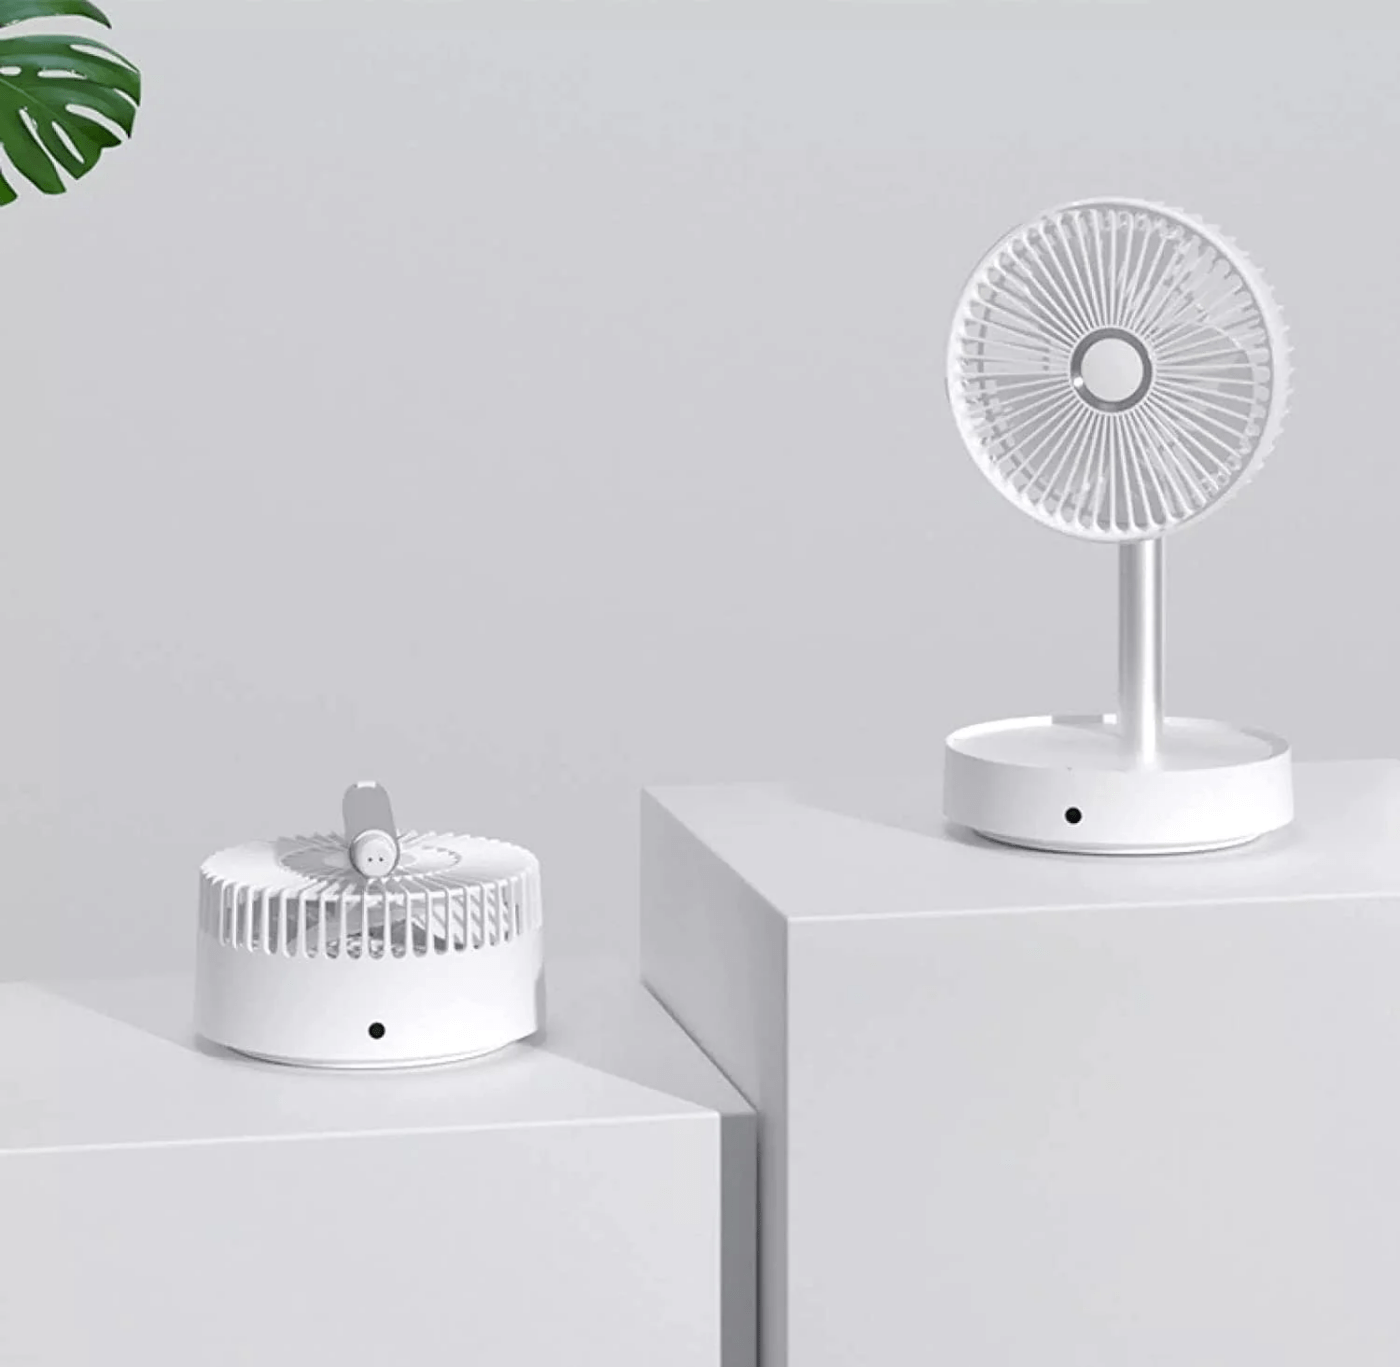 High-quality desk fans or portable air purifiers